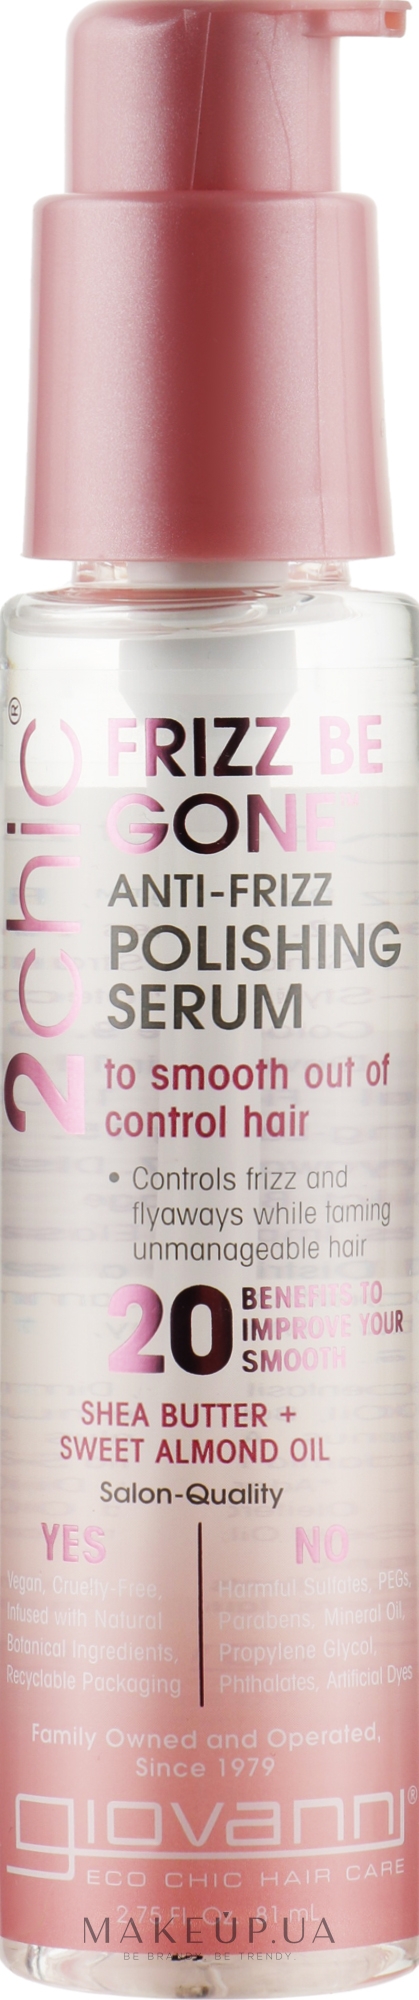 Сыворотка для волос - Giovanni Frizz Be Gone Polishing Serum To Smooth Out Of Control Hair — фото 81ml